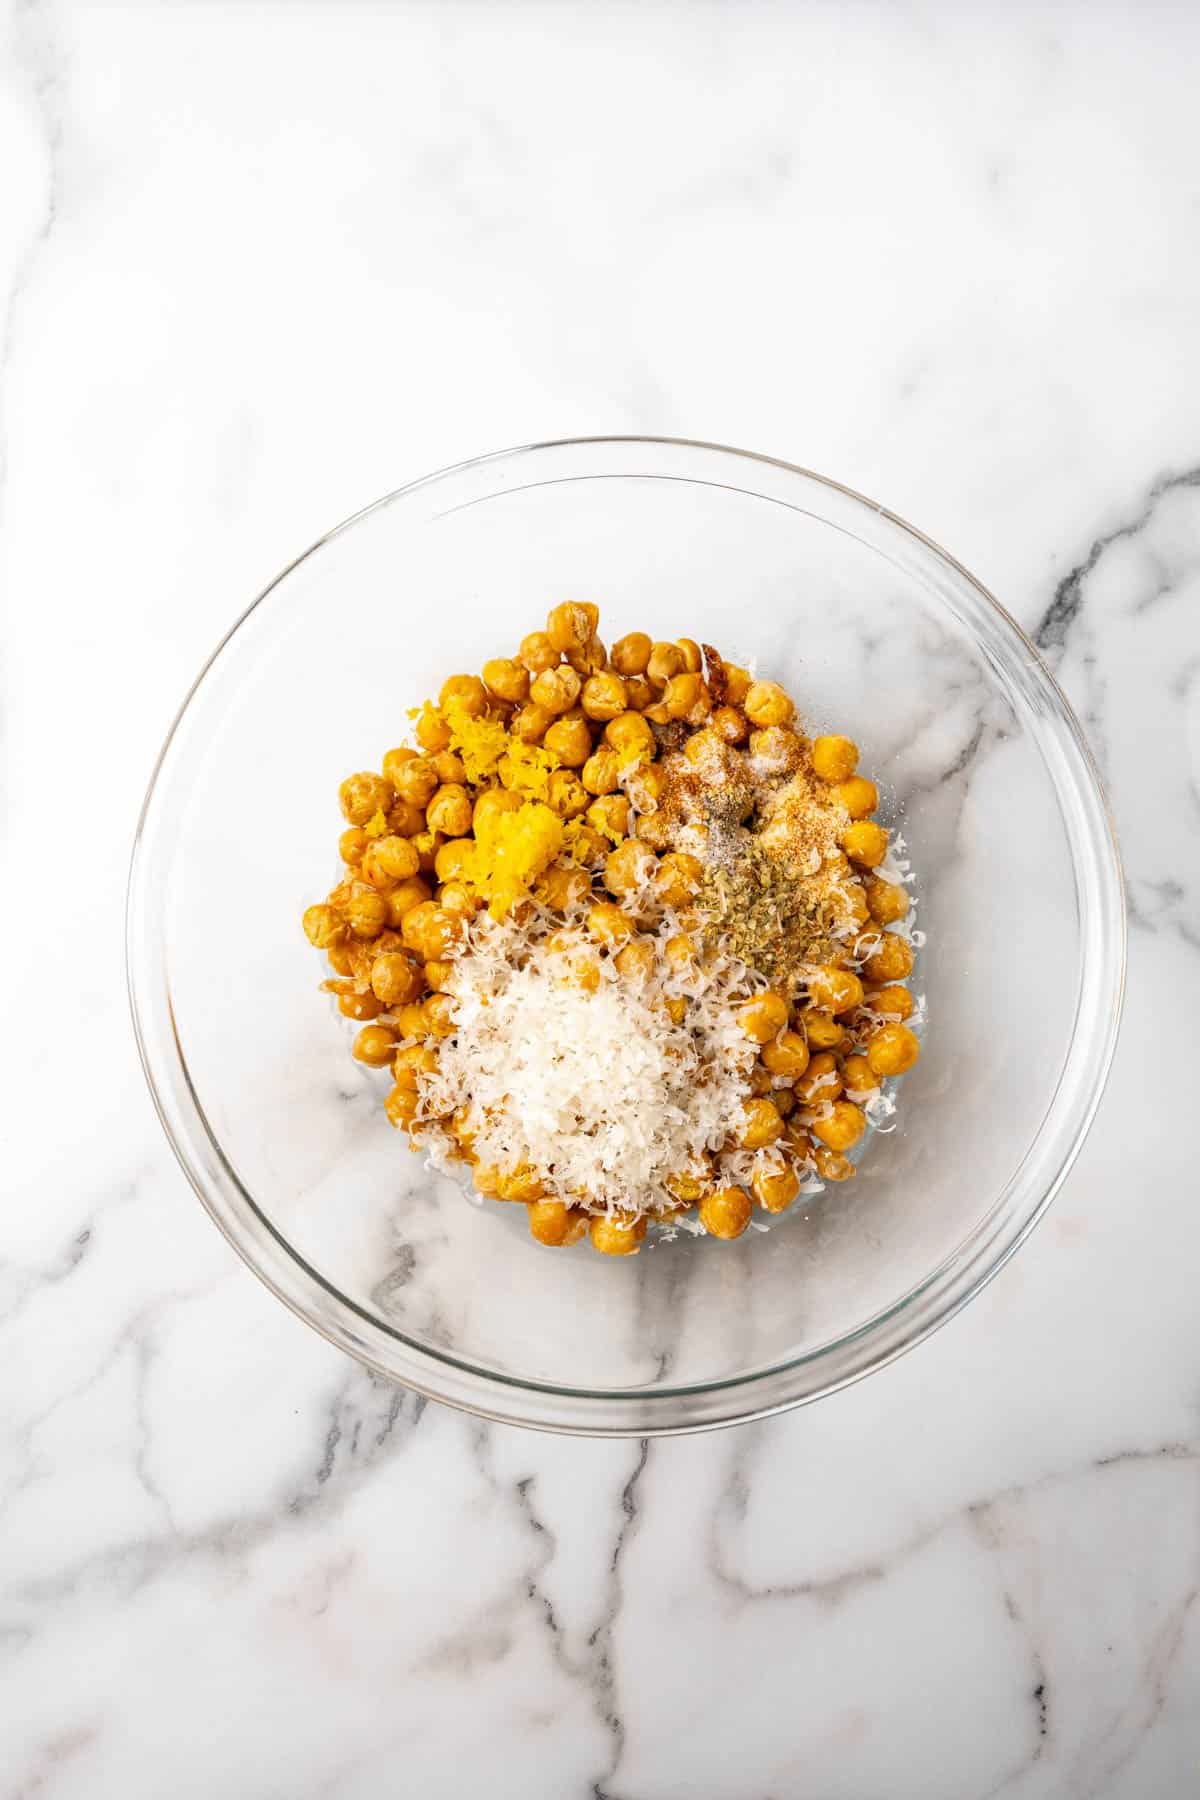 Roasted chickpeas in a glass bowl with parmesan and seasoning added on top, as seen from above on a white marble countertop